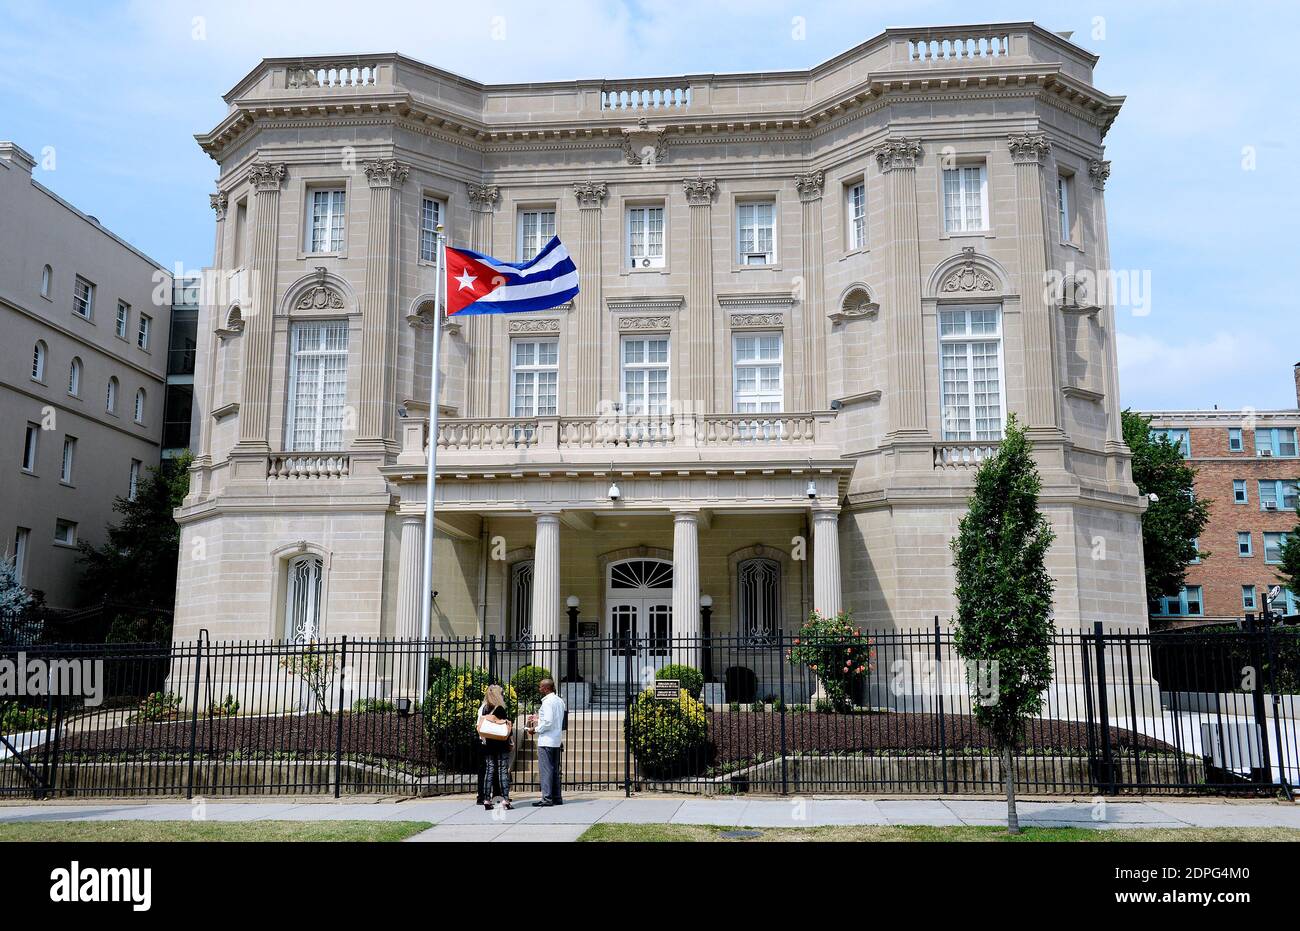 The Cuban flag flies in front of the country's embassy after 54 years July 30, 2015 in Washington, DC. The embassy was closed in 1961 when U.S. President Dwight Eisenhower severed diplomatic ties with the island nation after Fidel Castro took power in a Communist revolution.Photo by Olivier Douliery/ABACAPRESS.COM Stock Photo